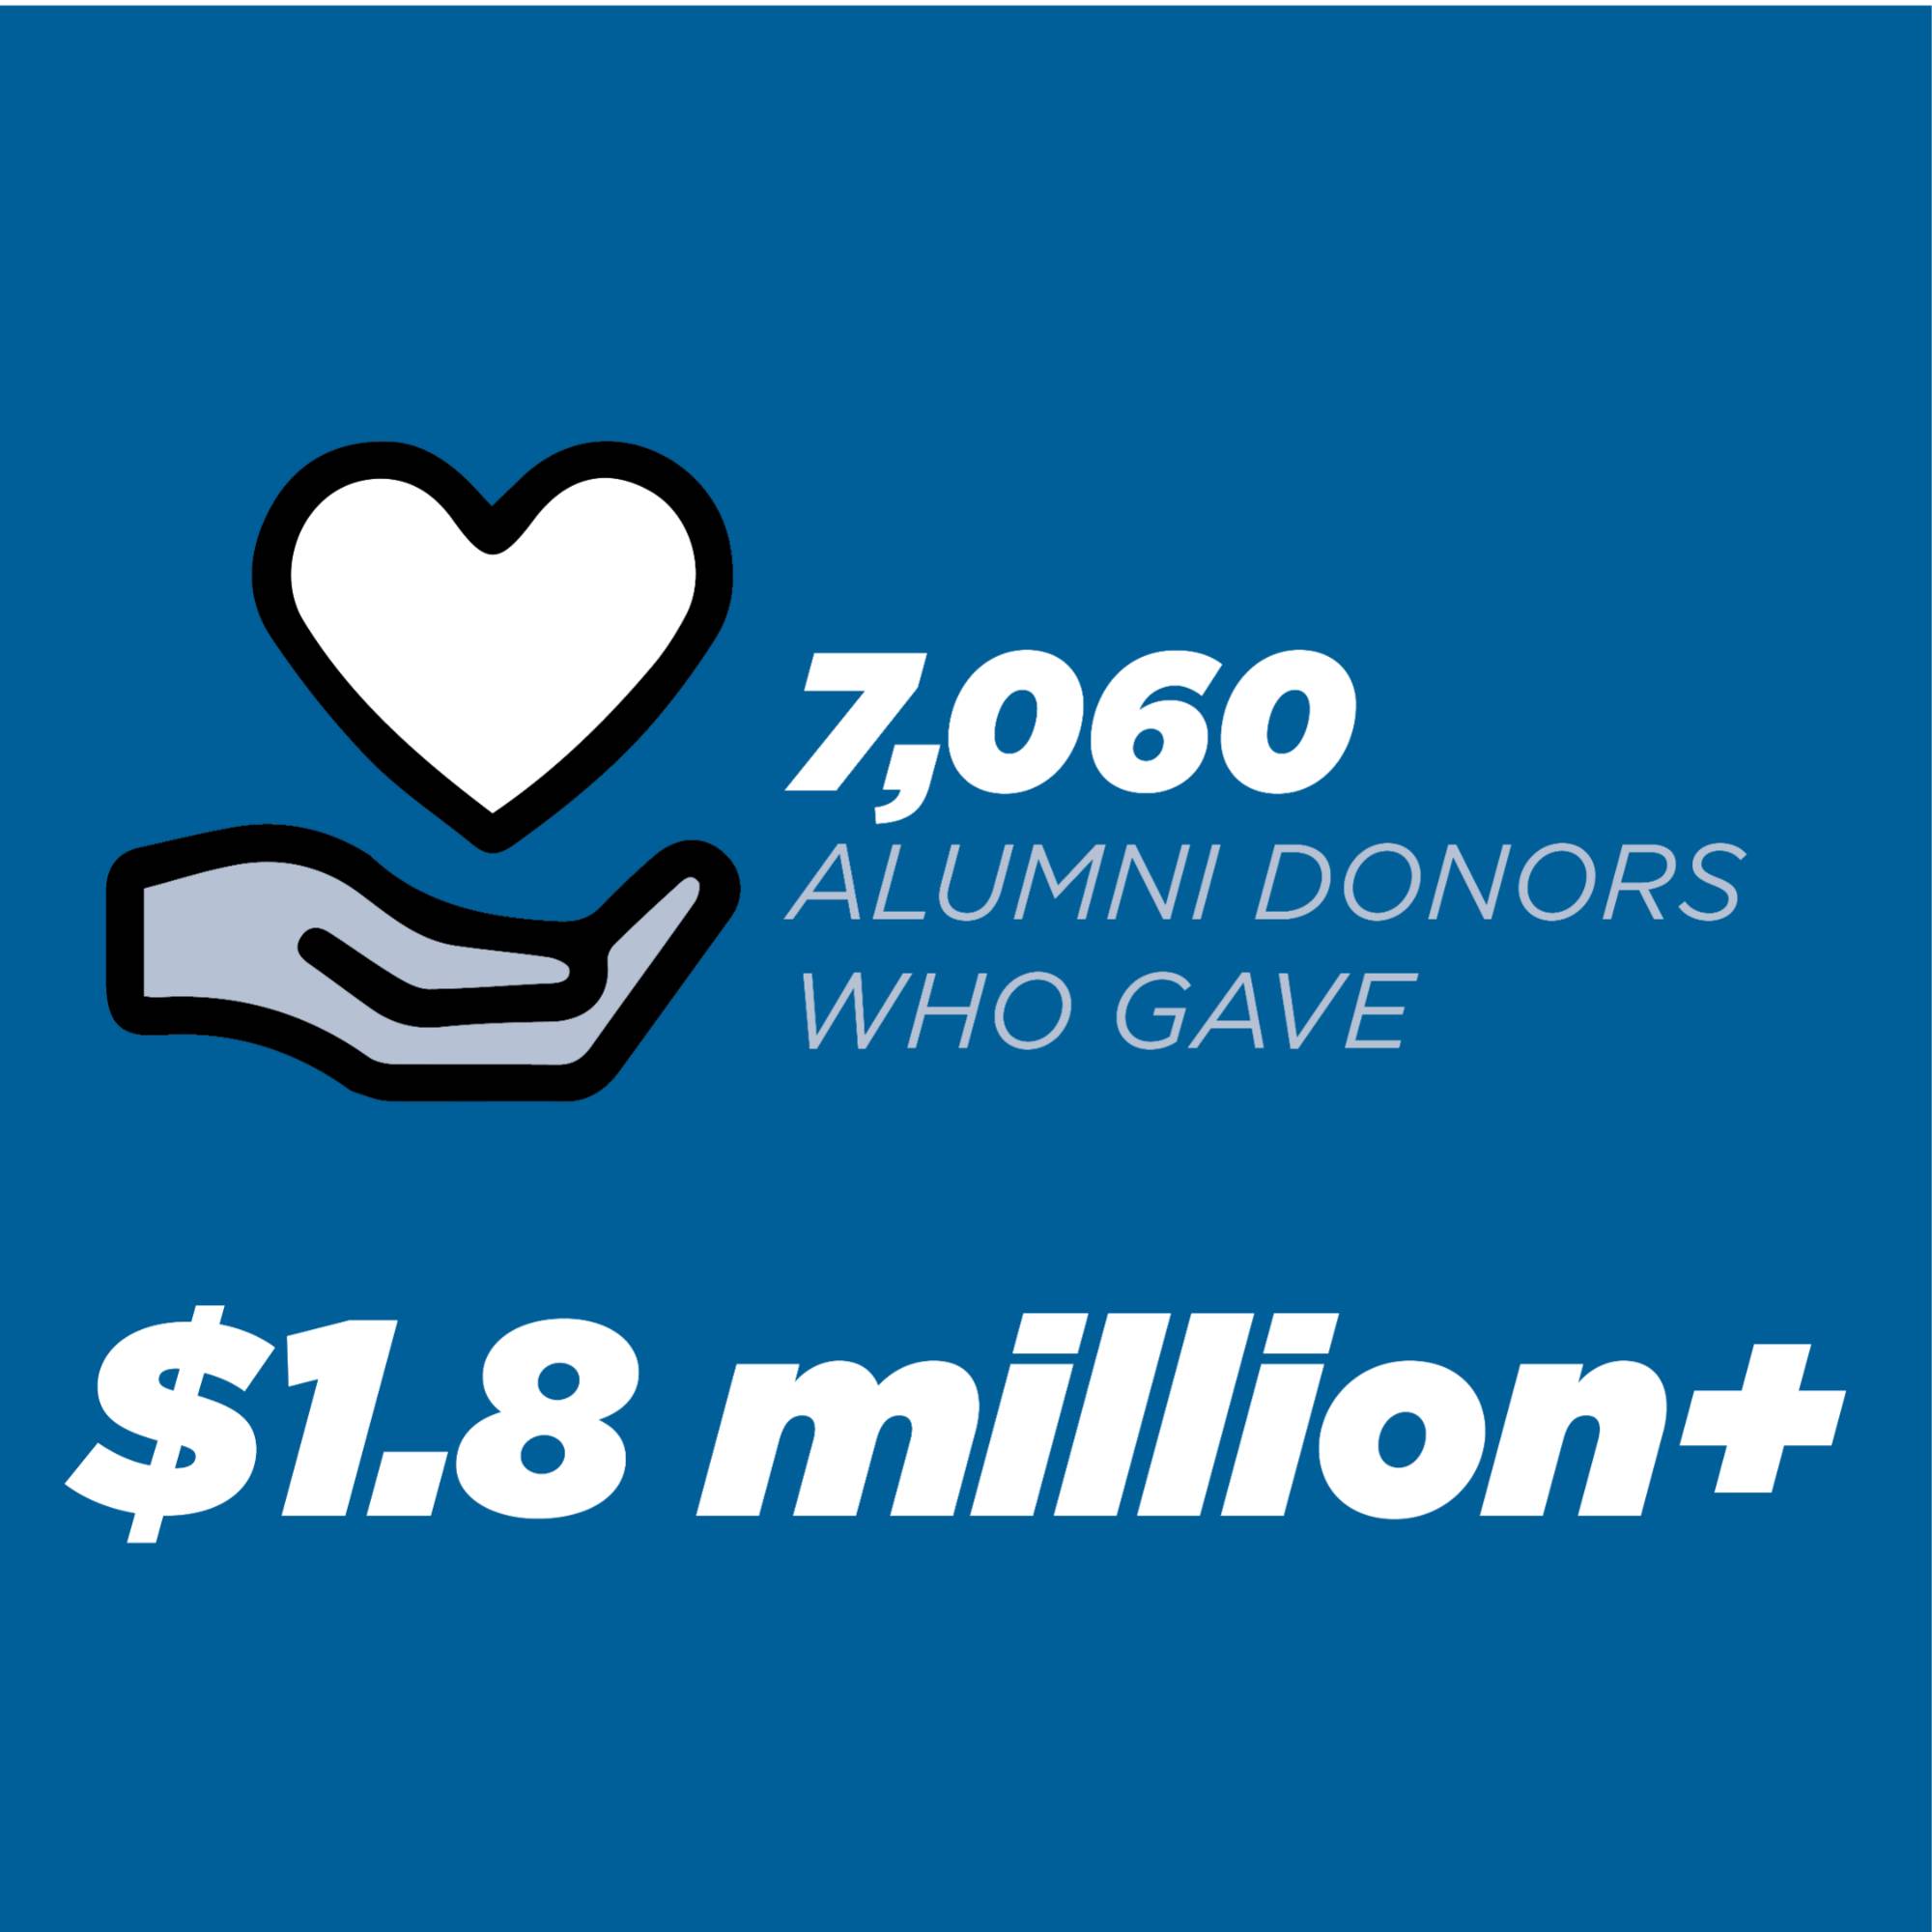 7,060 Alumni Donors who gave $1.8 million+